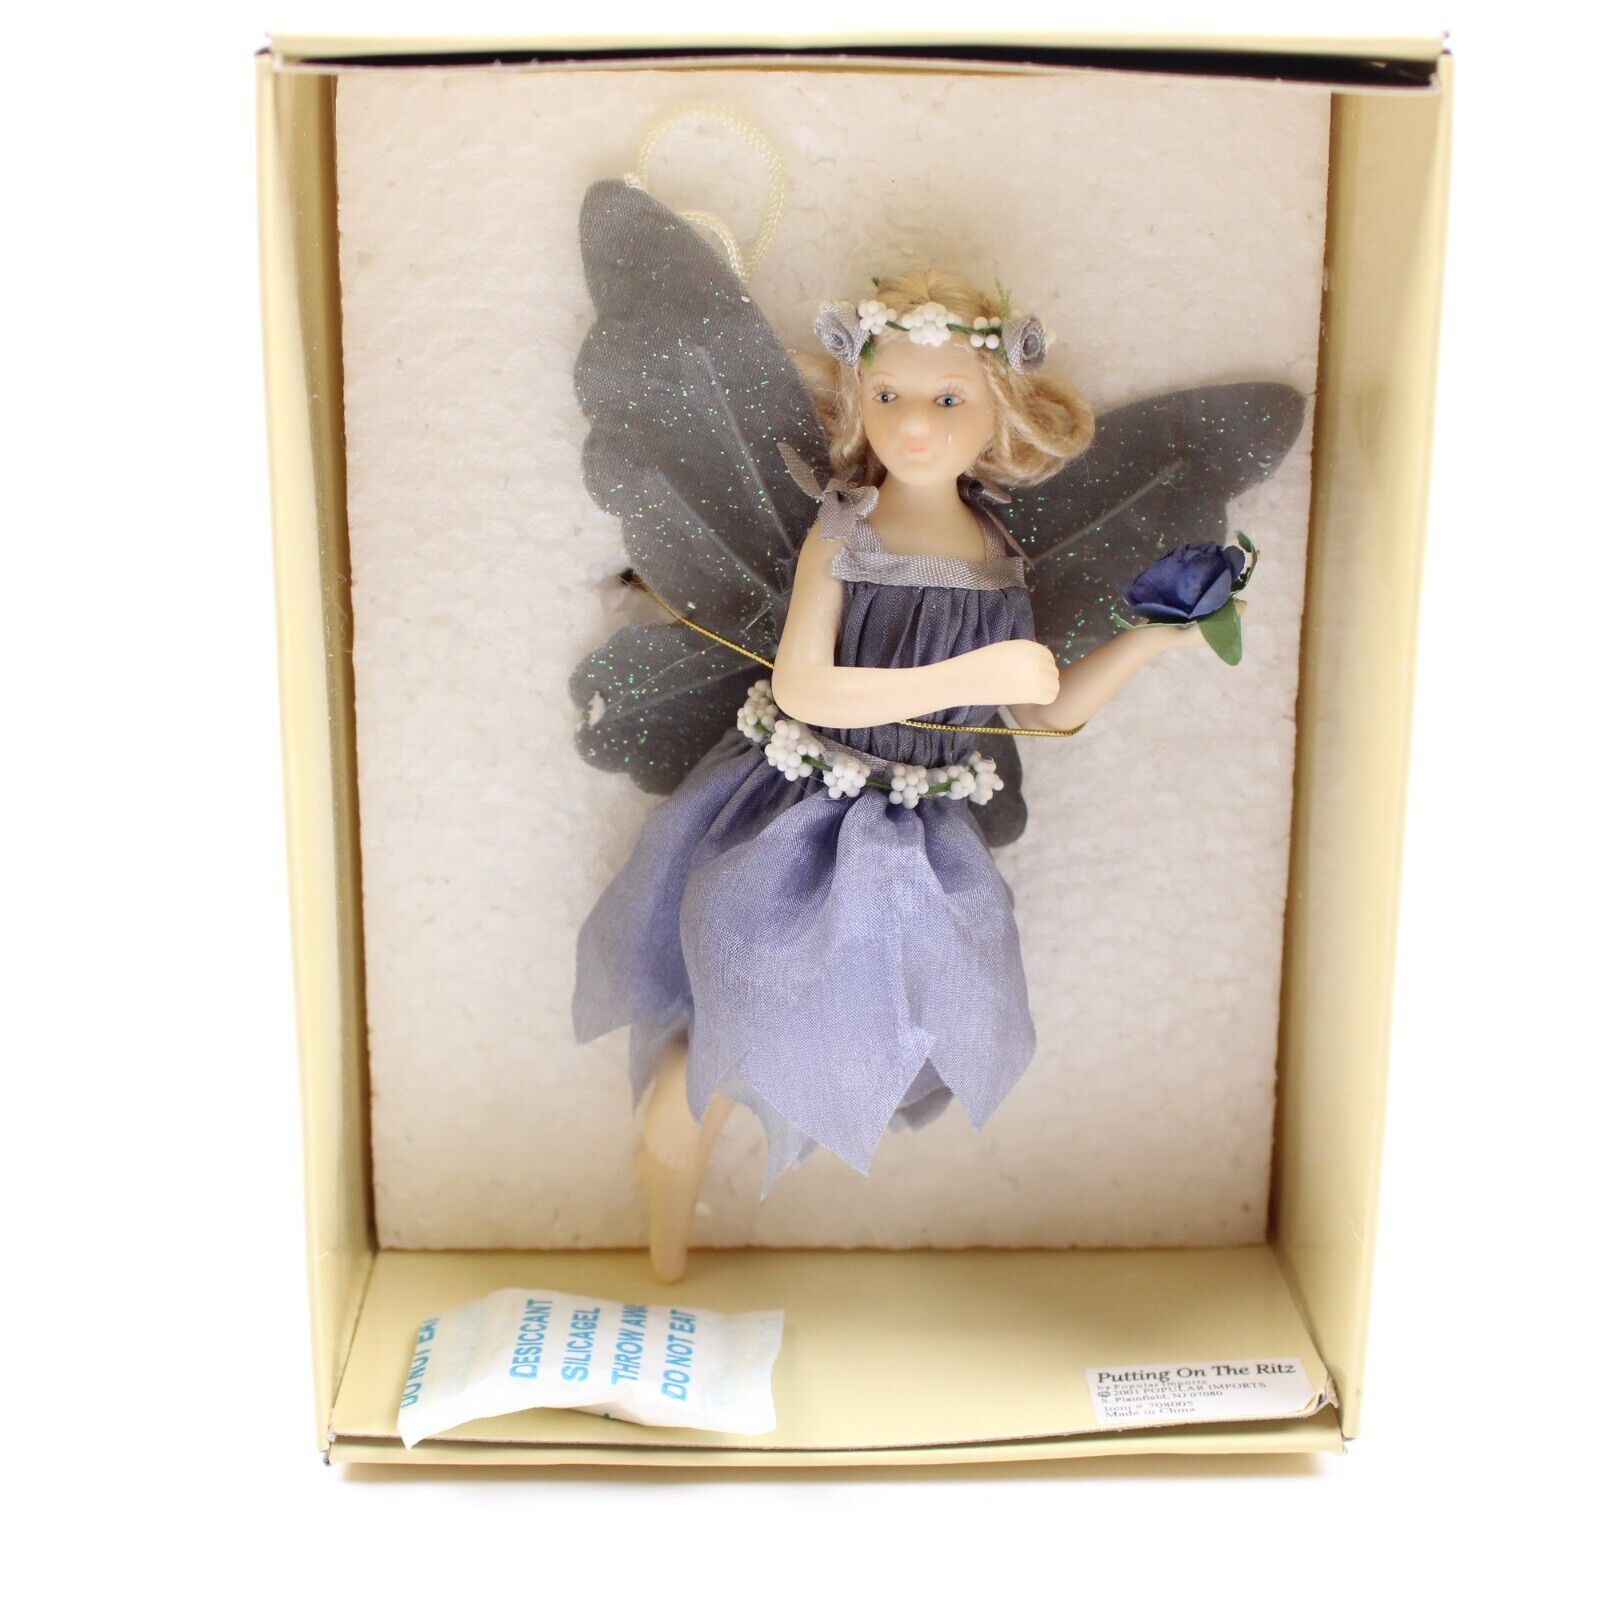 Putting on the Ritz By Popular Imports 2001 Lavender Fairy Ornament with Box